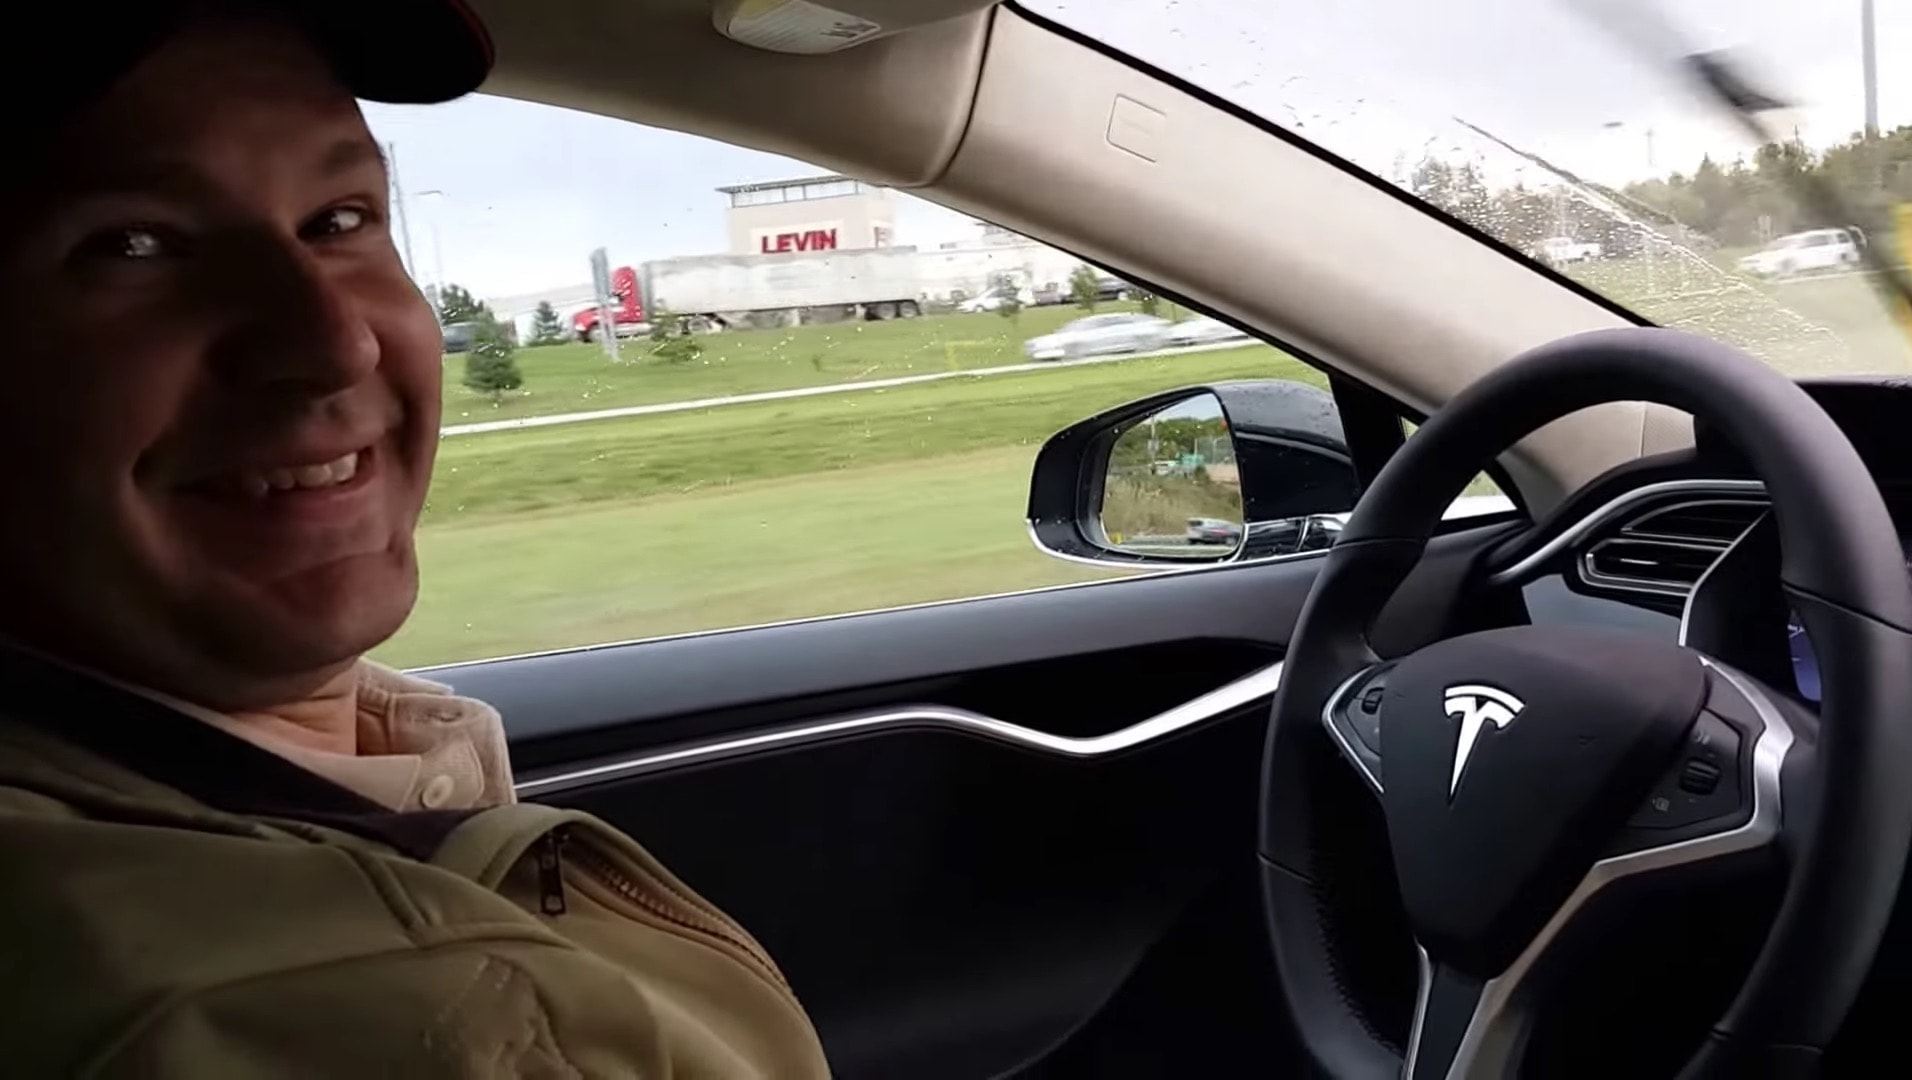 Germany says Tesla should not use 'Autopilot' in advertising